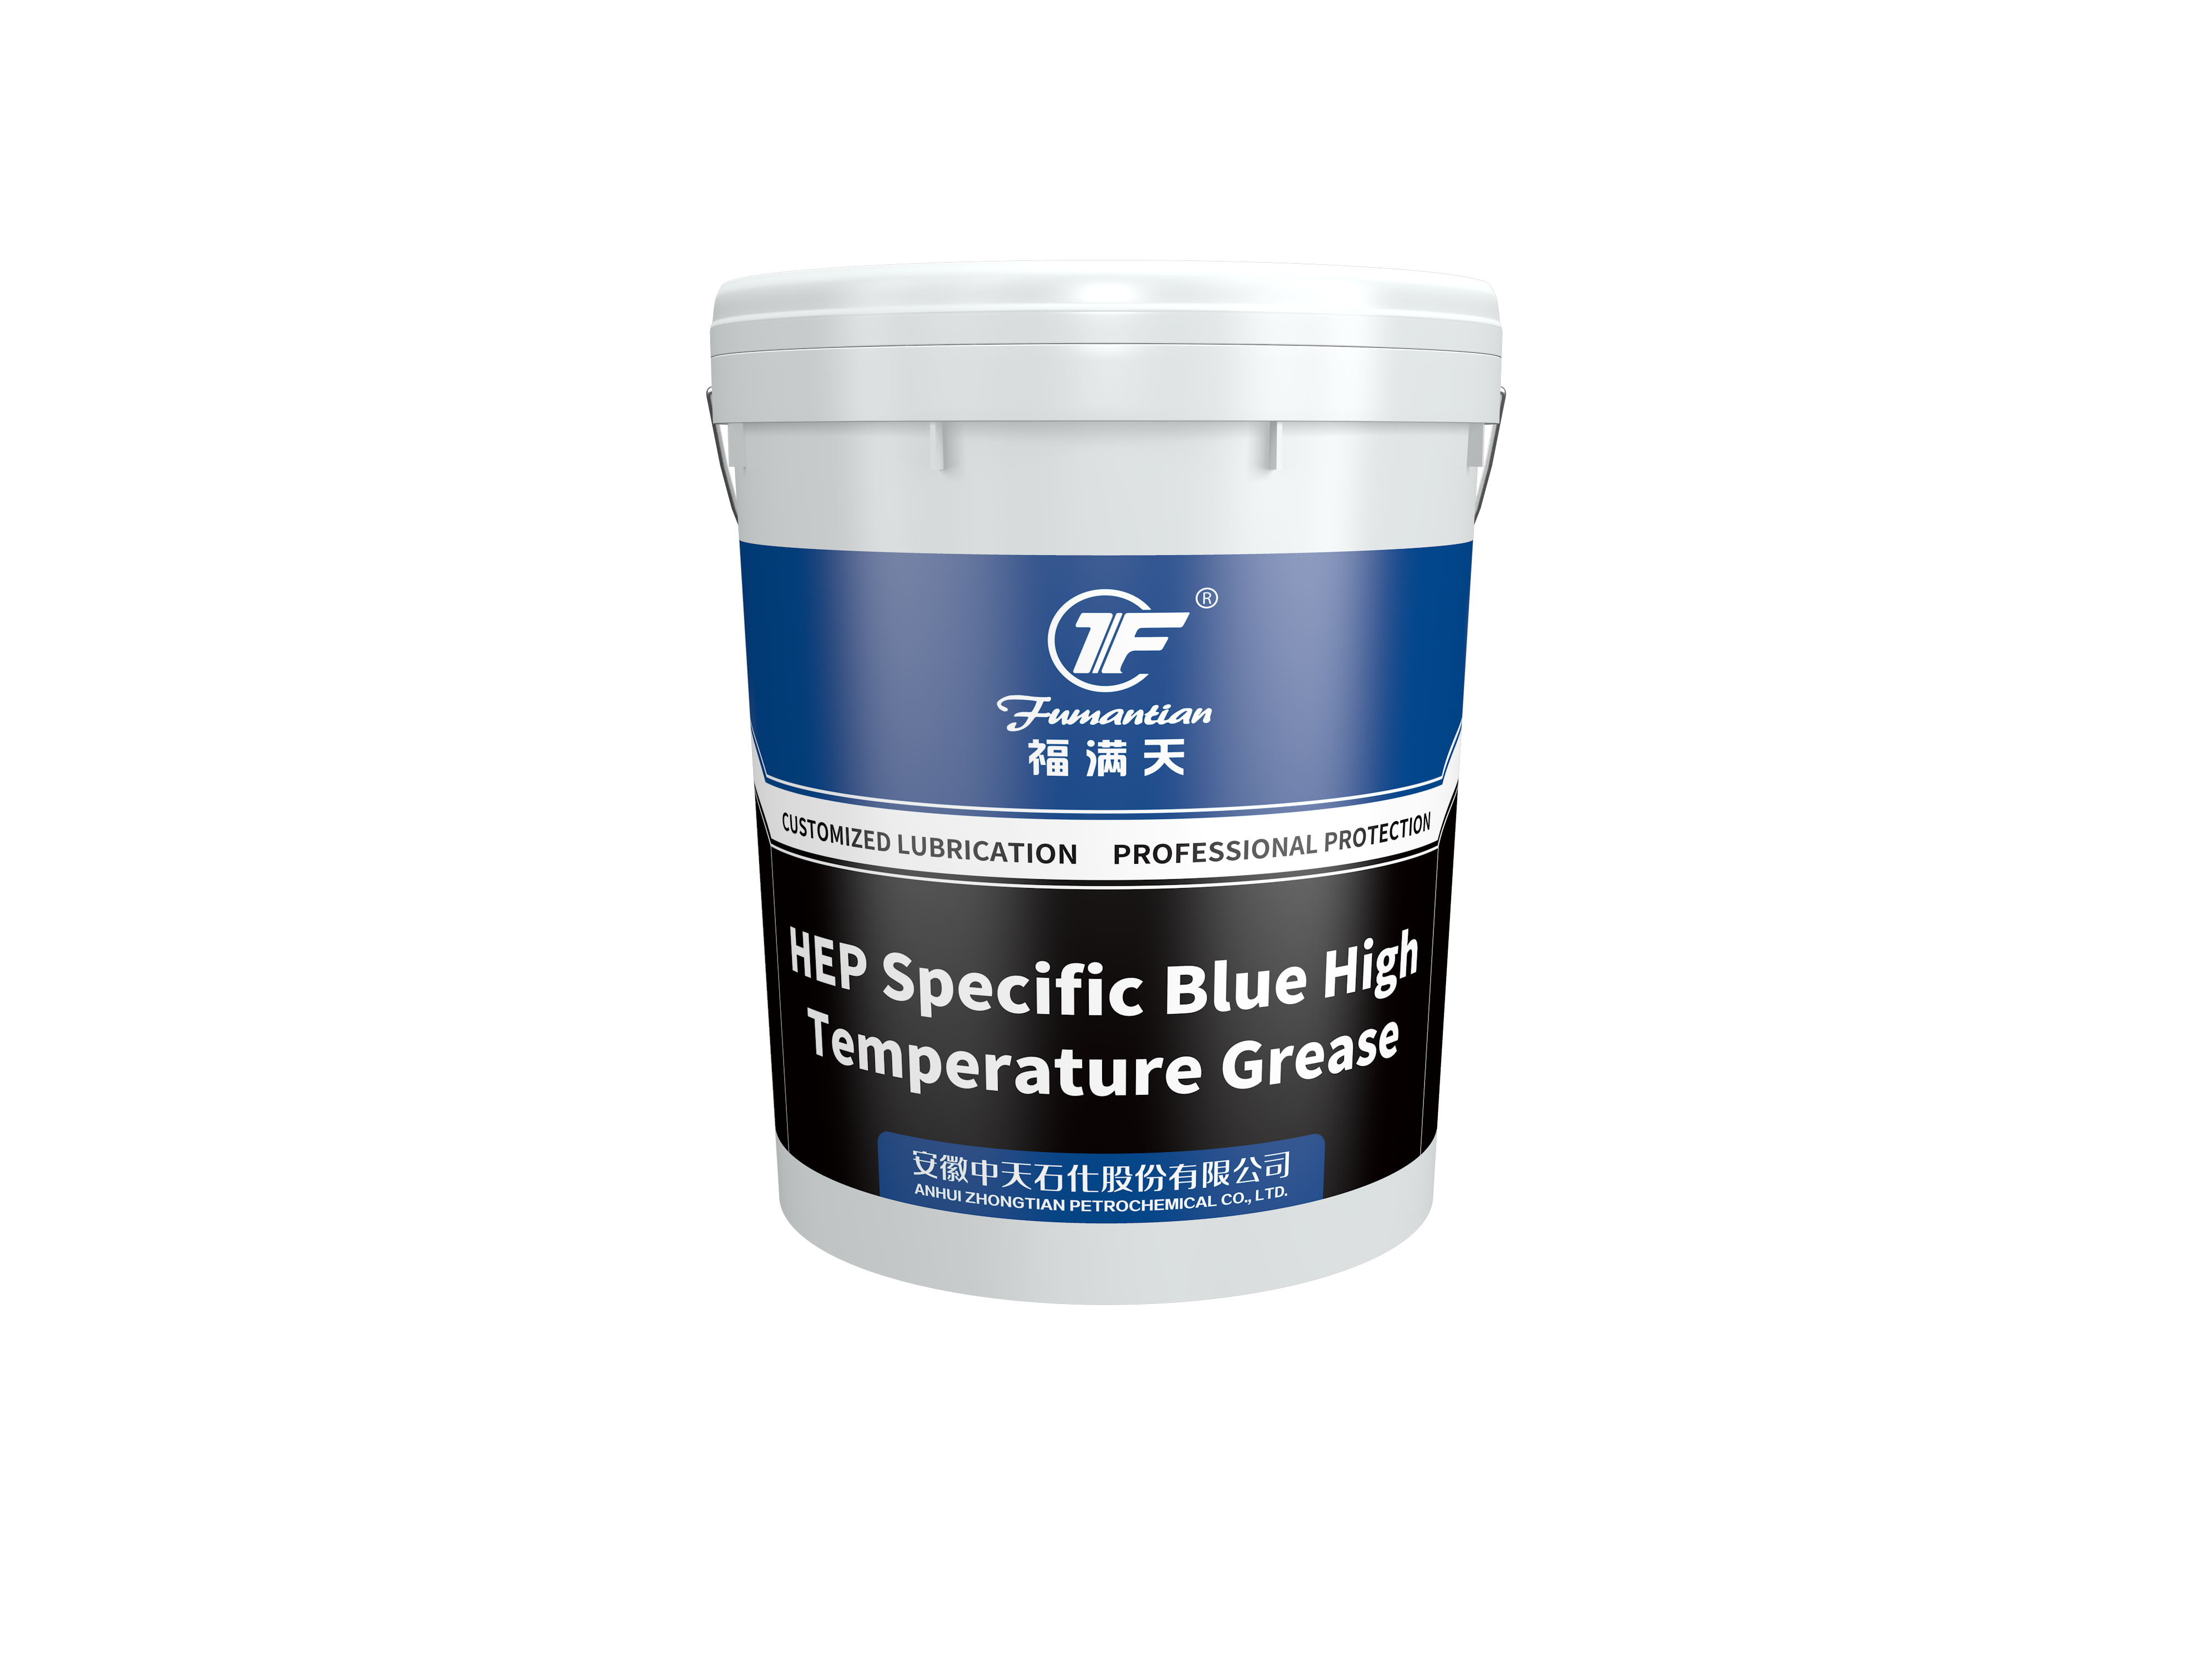 HEP Specific Blue High Temperature Grease